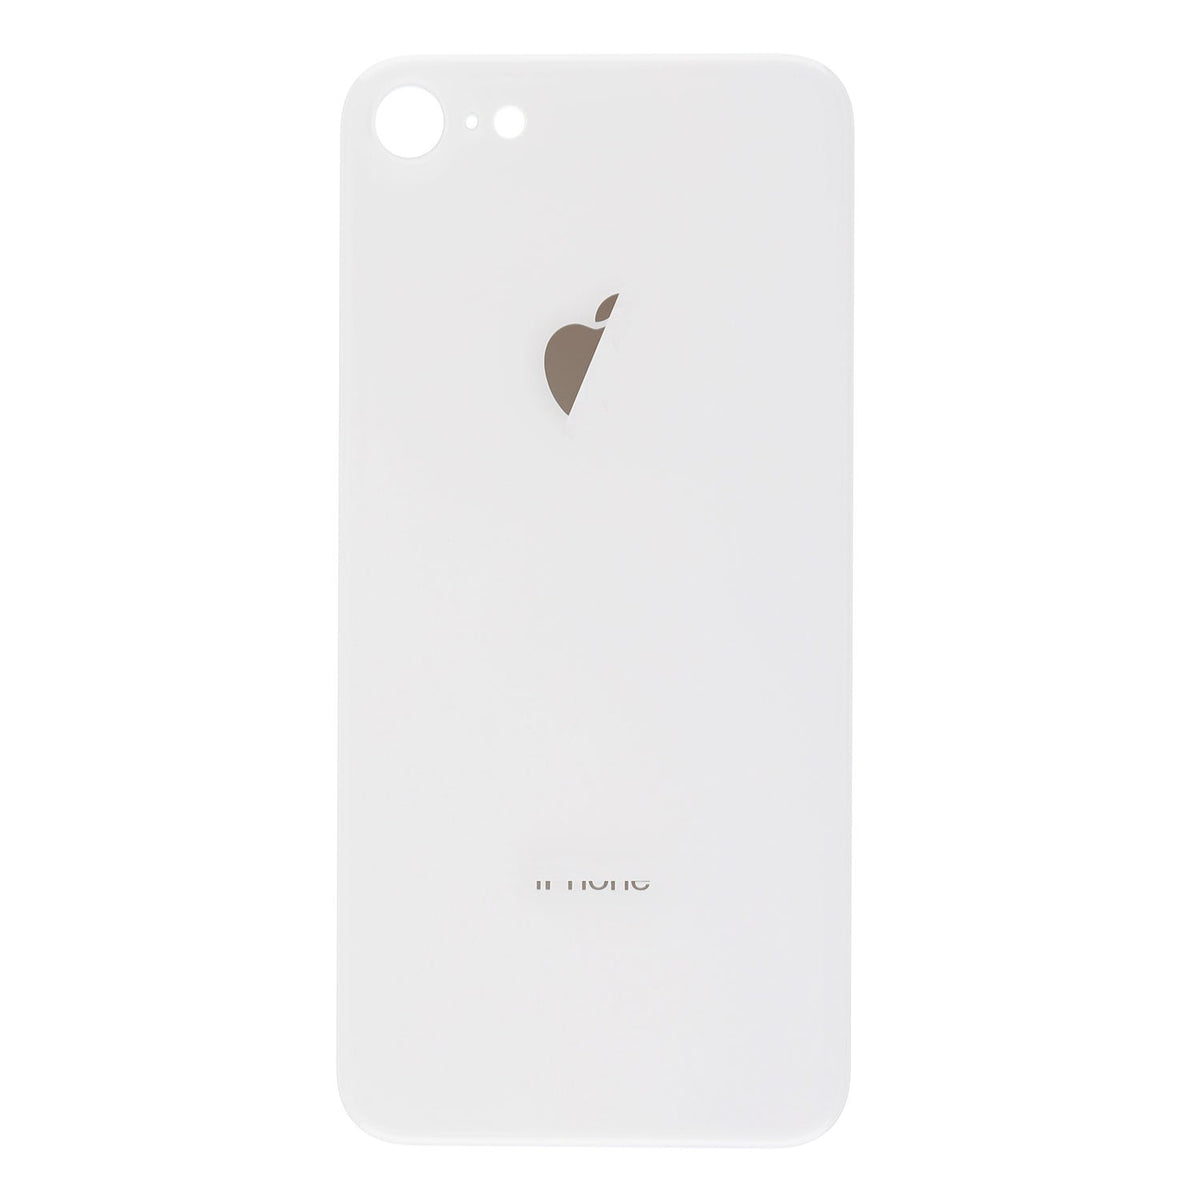 SILVER BACK COVER FOR IPHONE 8